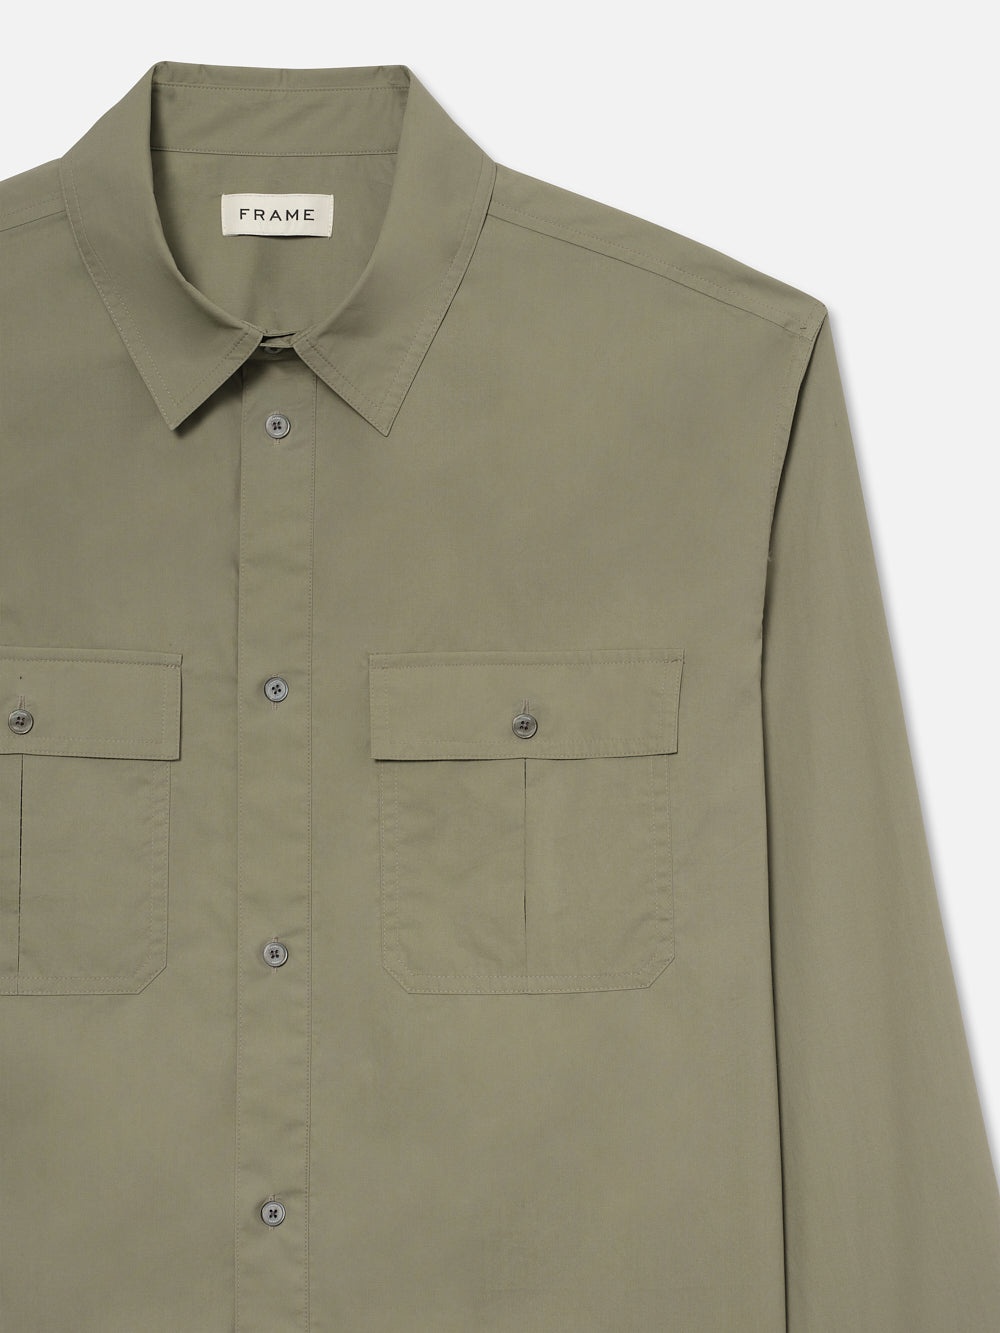 Military Shirt in Dry Sage - 2